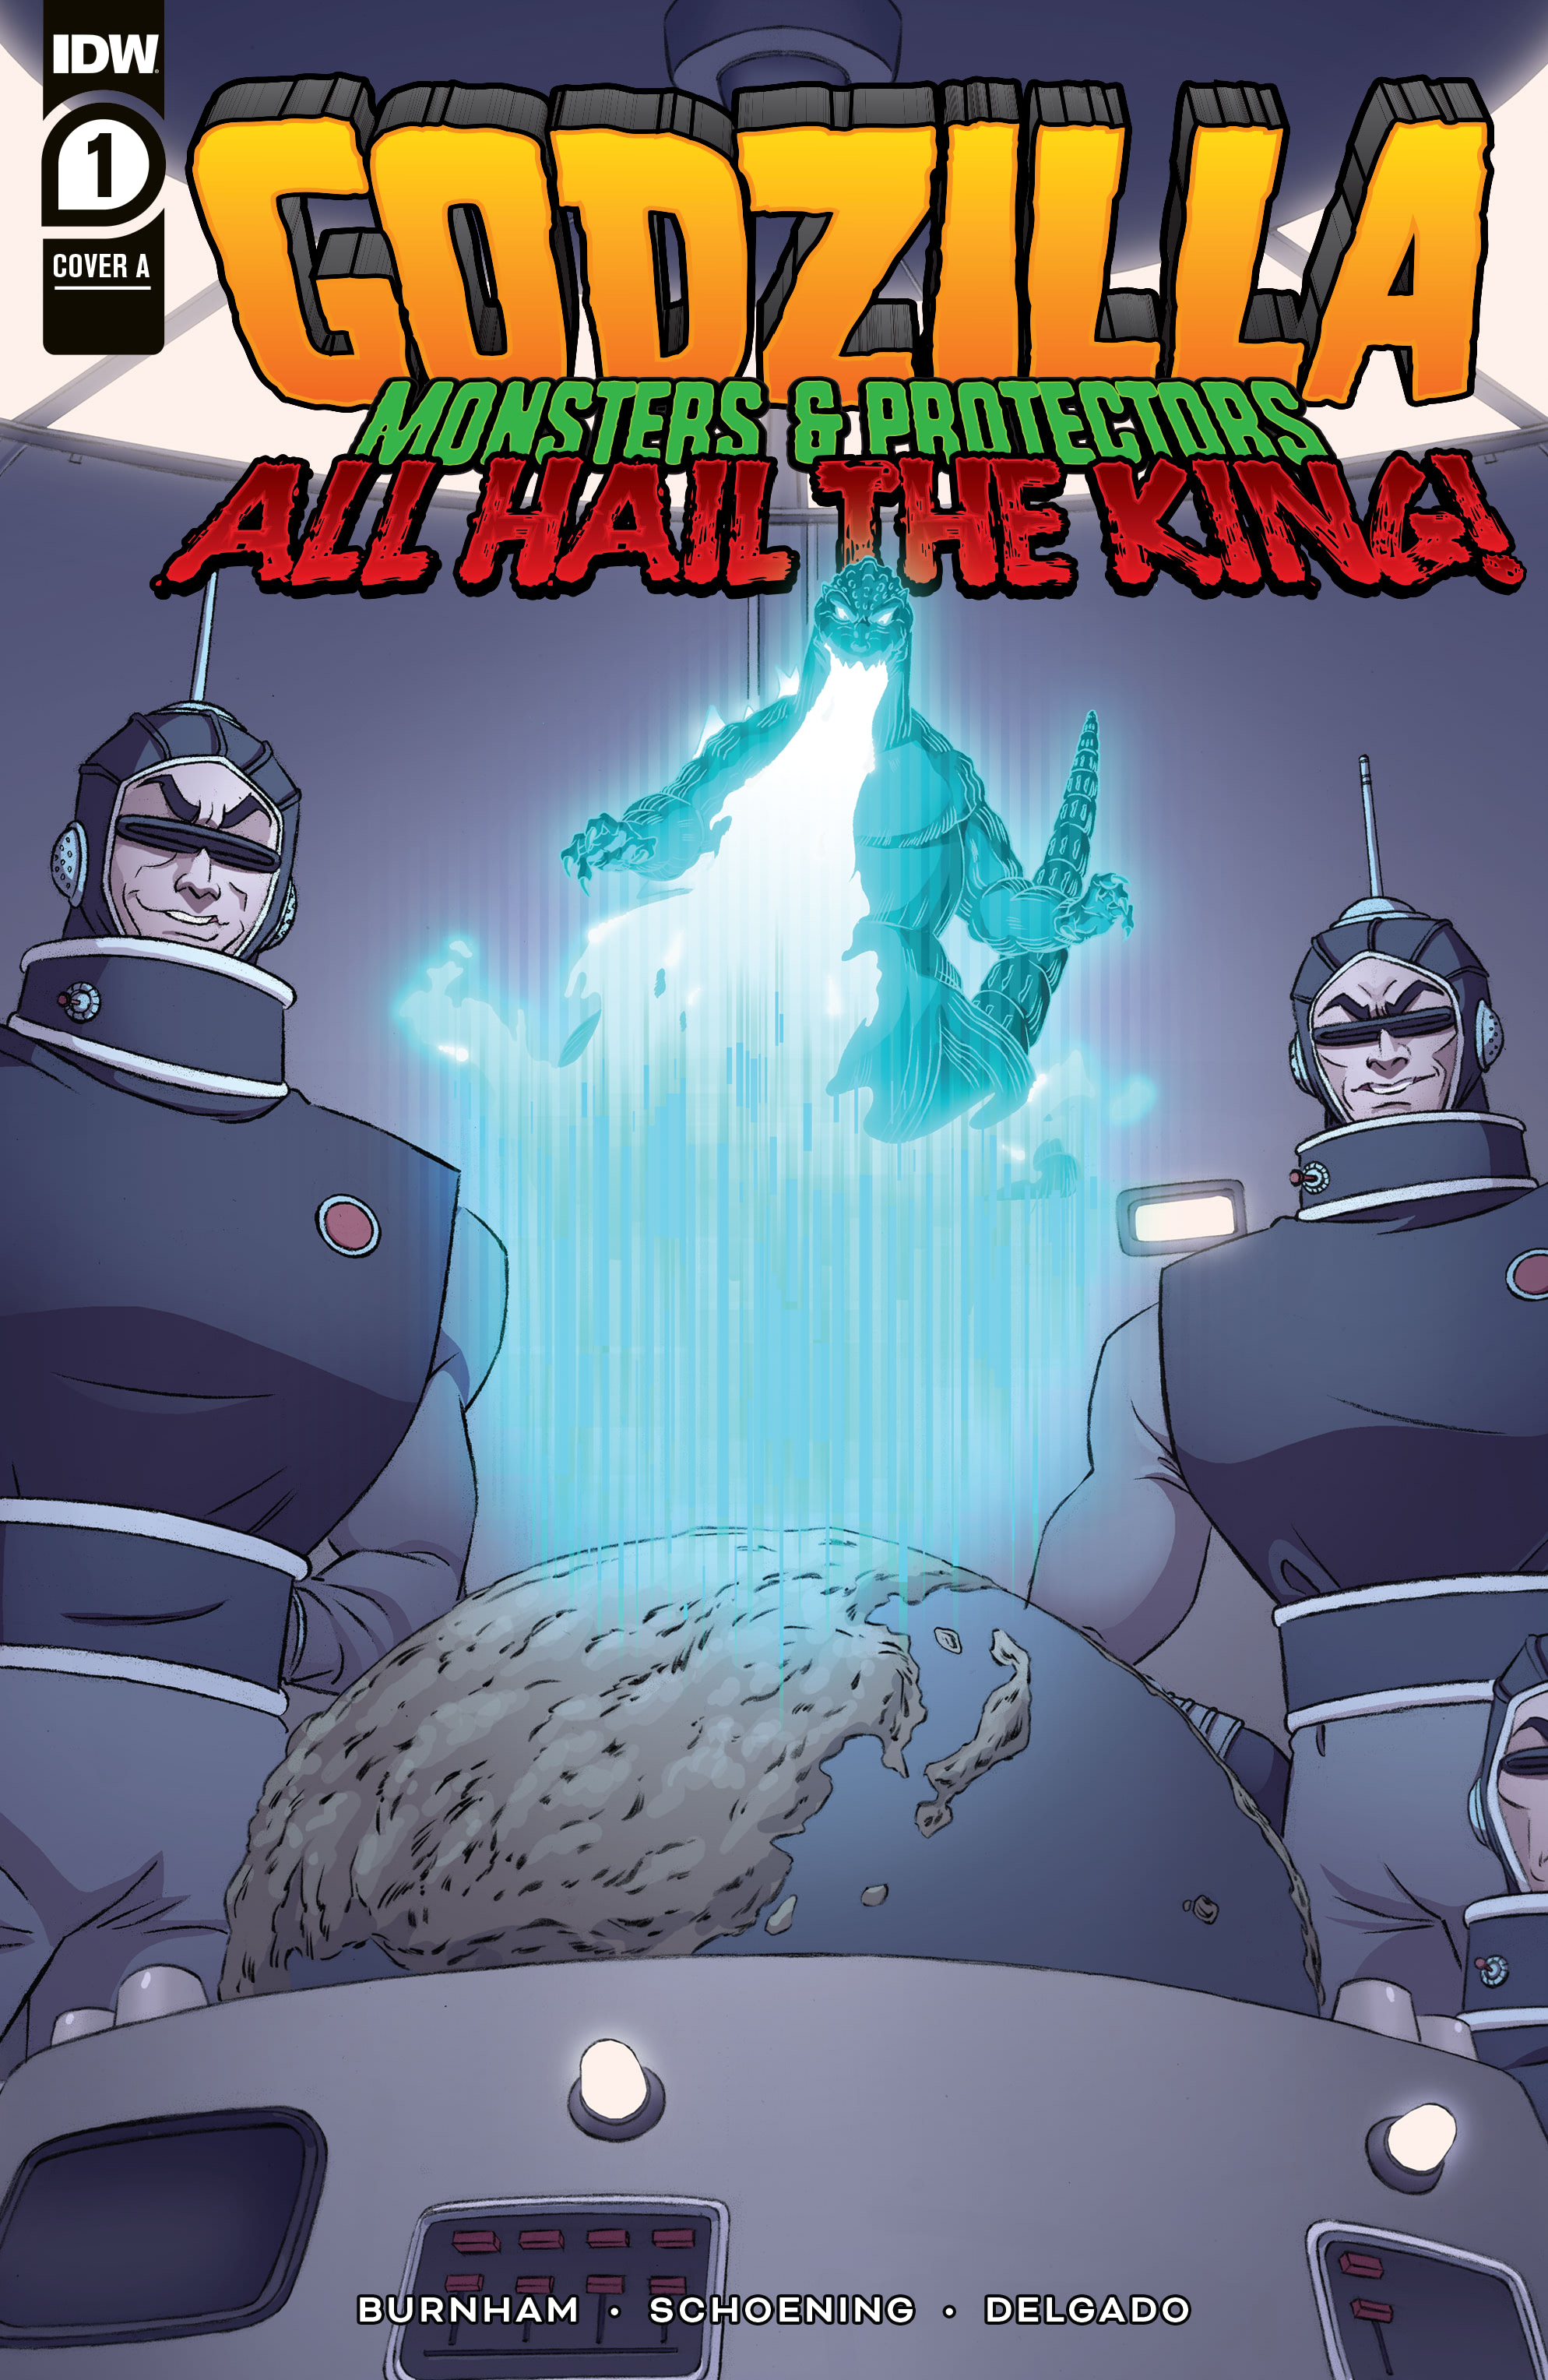 Hail The King Chapter 1 Godzilla: Monsters & Protectors - All Hail the King (2022-) Chapter 1 -  Page 1